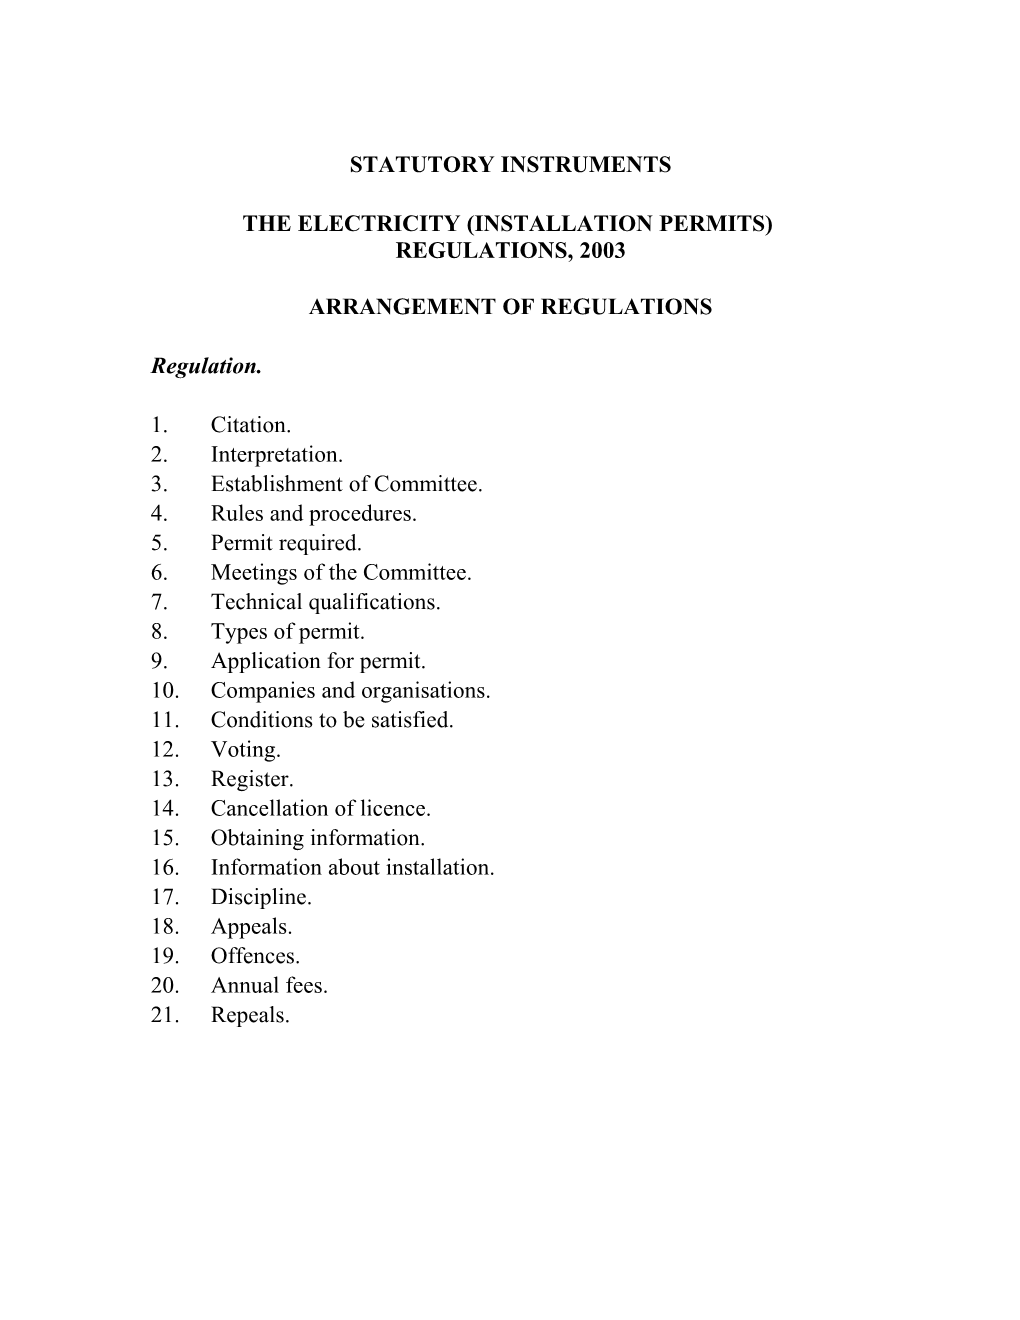 The Electricity (Installation Permits)